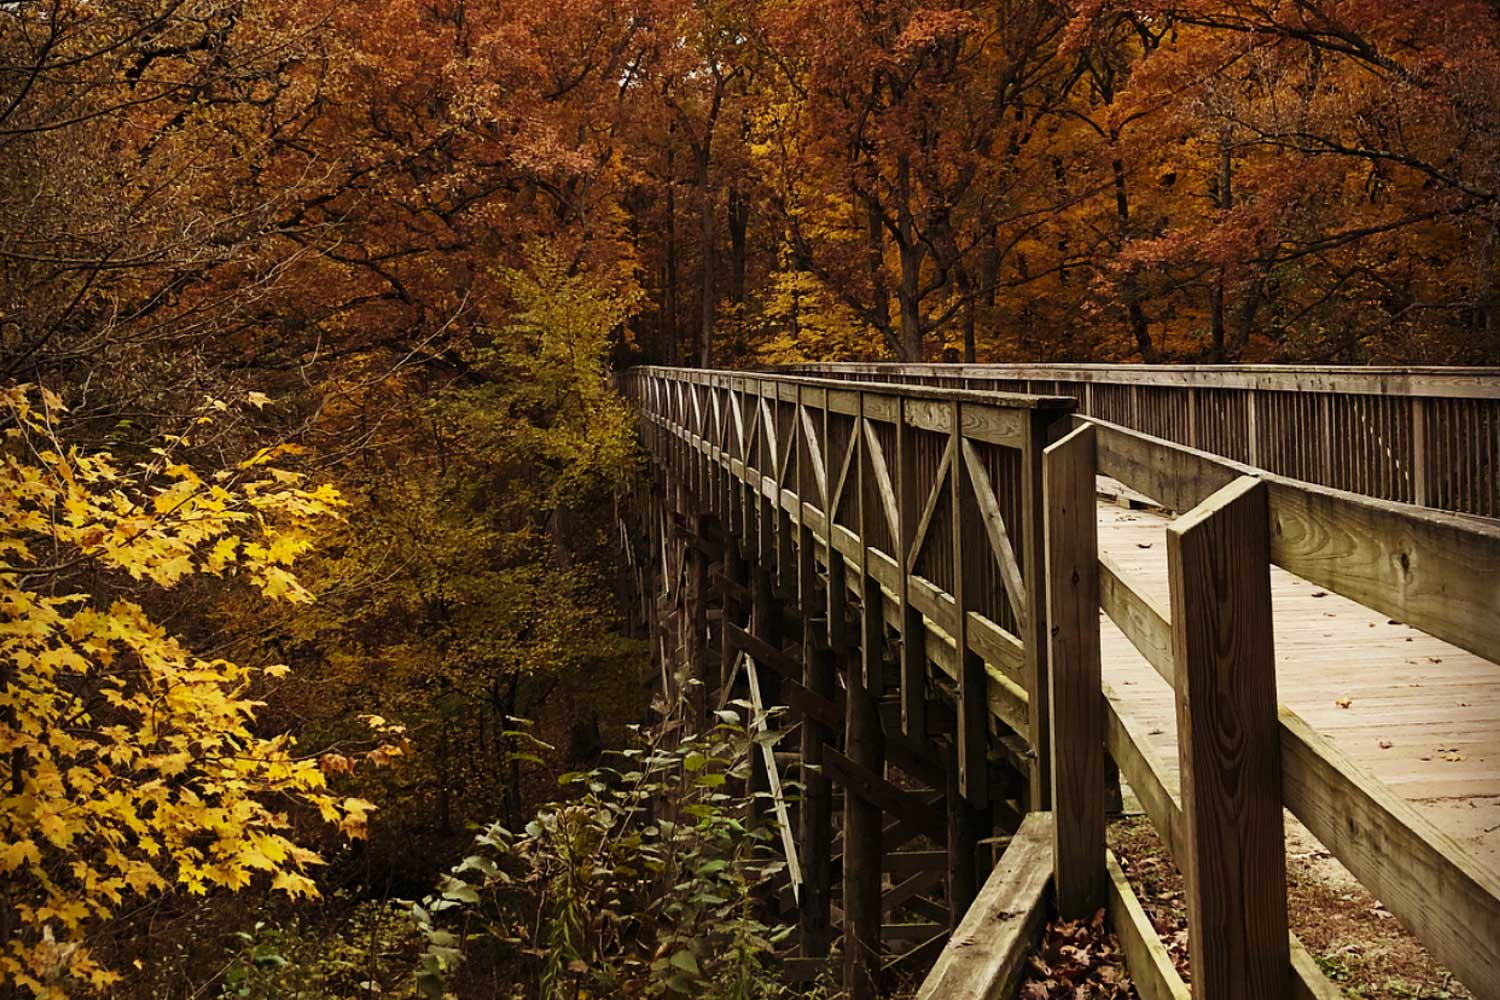 The big bridge along Plum Creek Greenway Trail surrounded by an autumn forest.